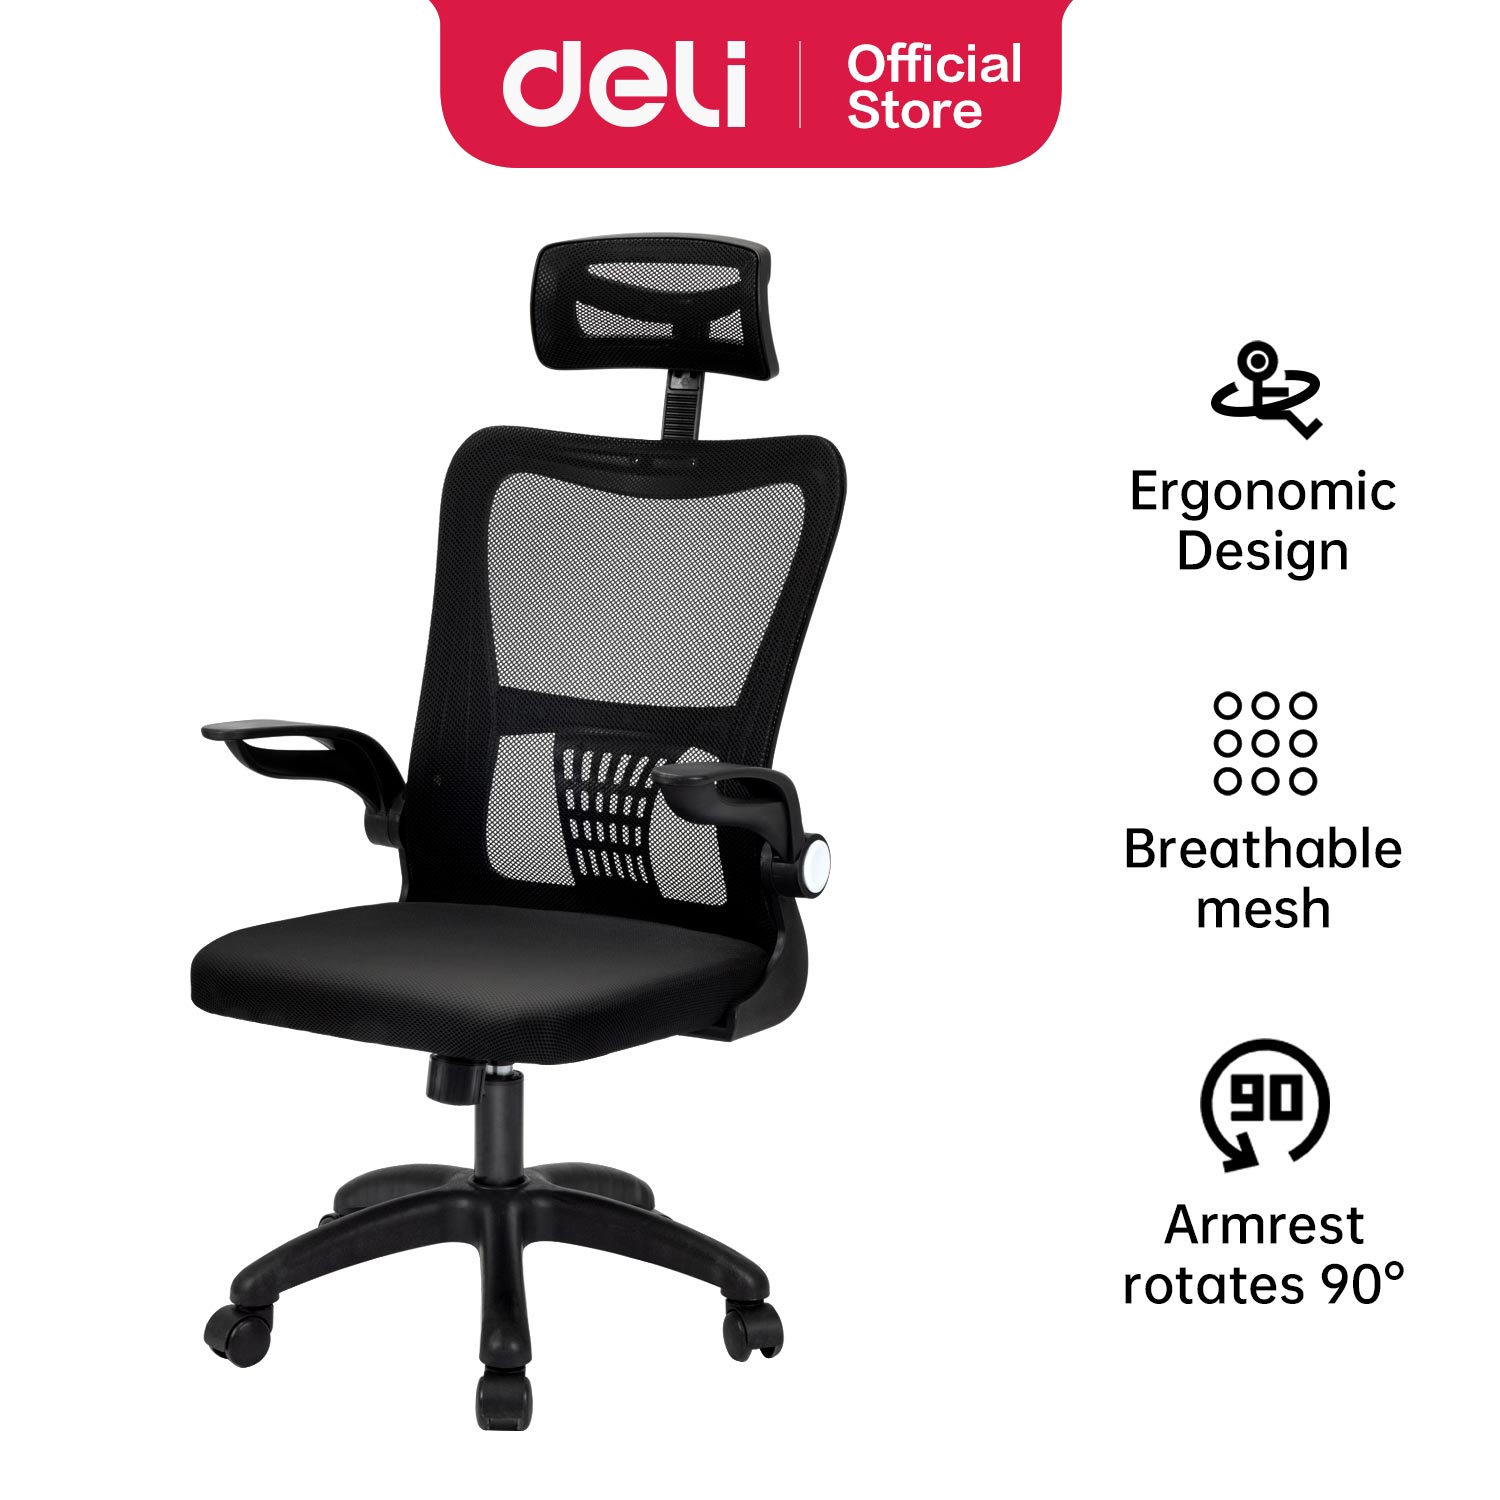 Deli-E4925 Office Chair with headrest